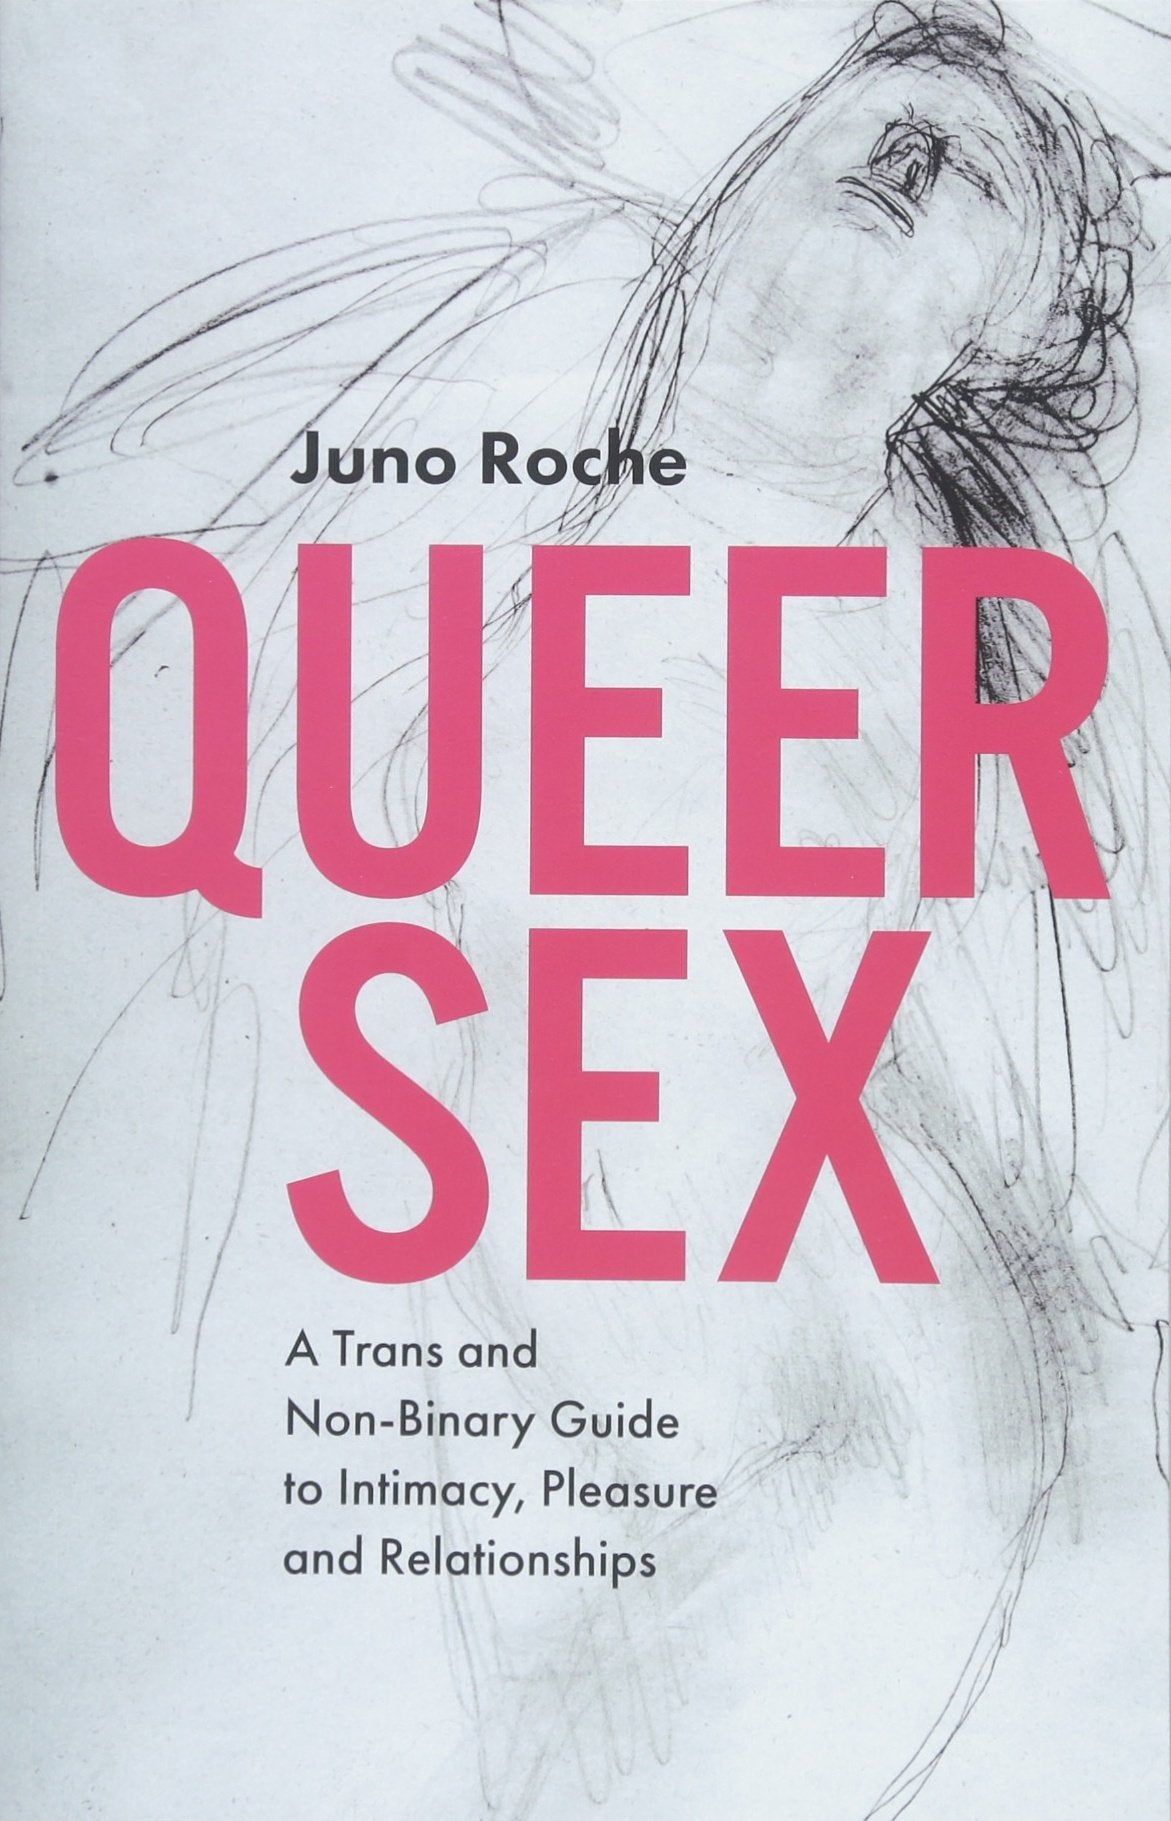 The front cover of Queer Sex: A Trans and Non-Binary Guide by Juno Roche.